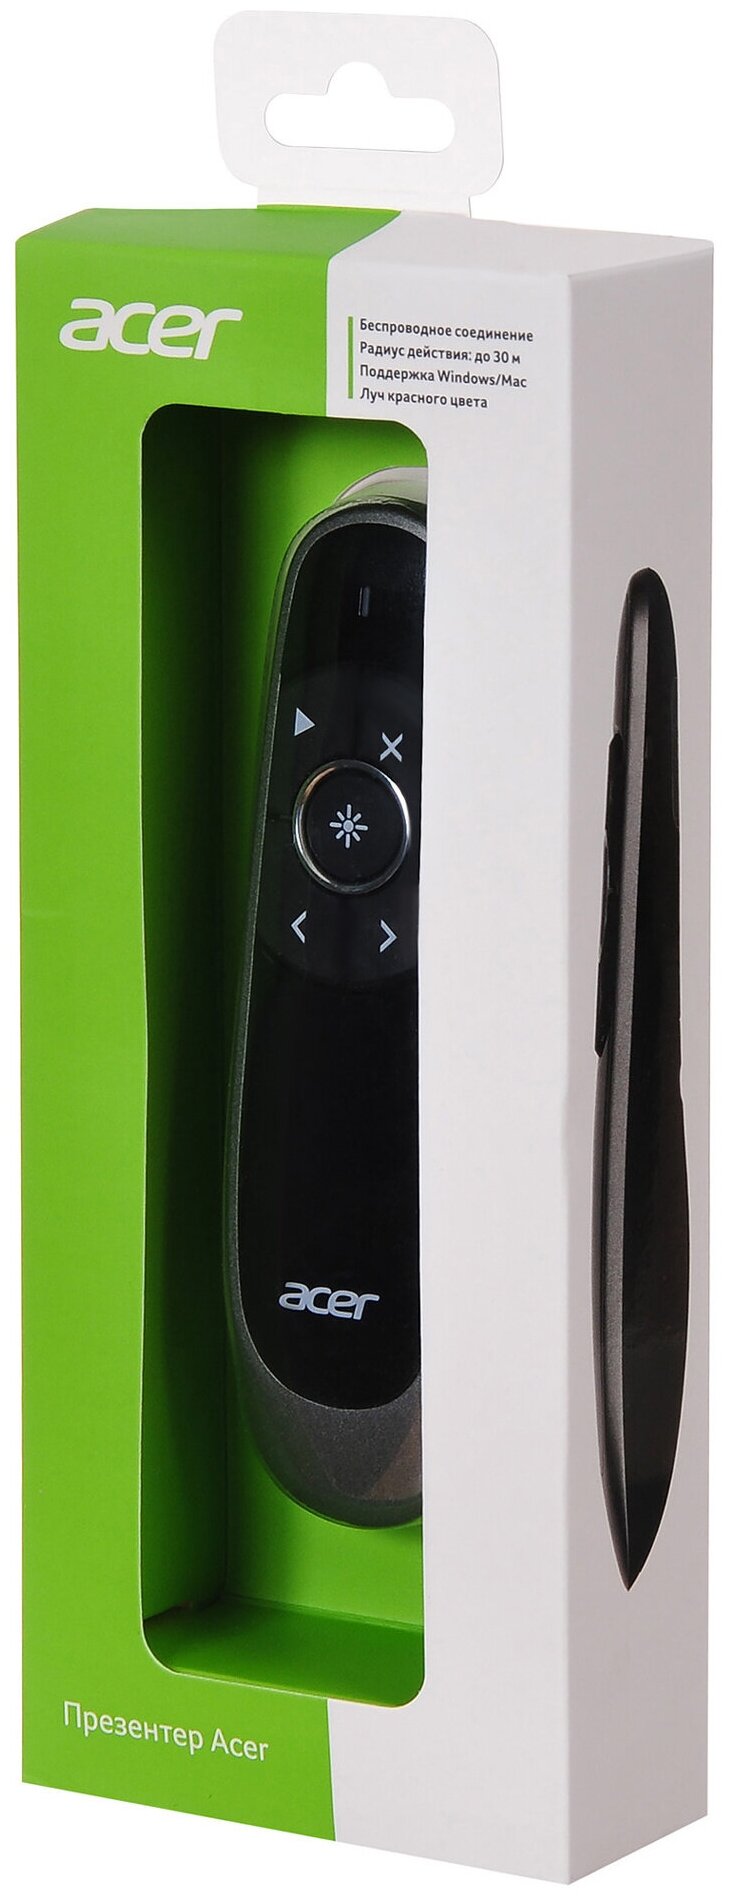 Презентер Acer OOD020